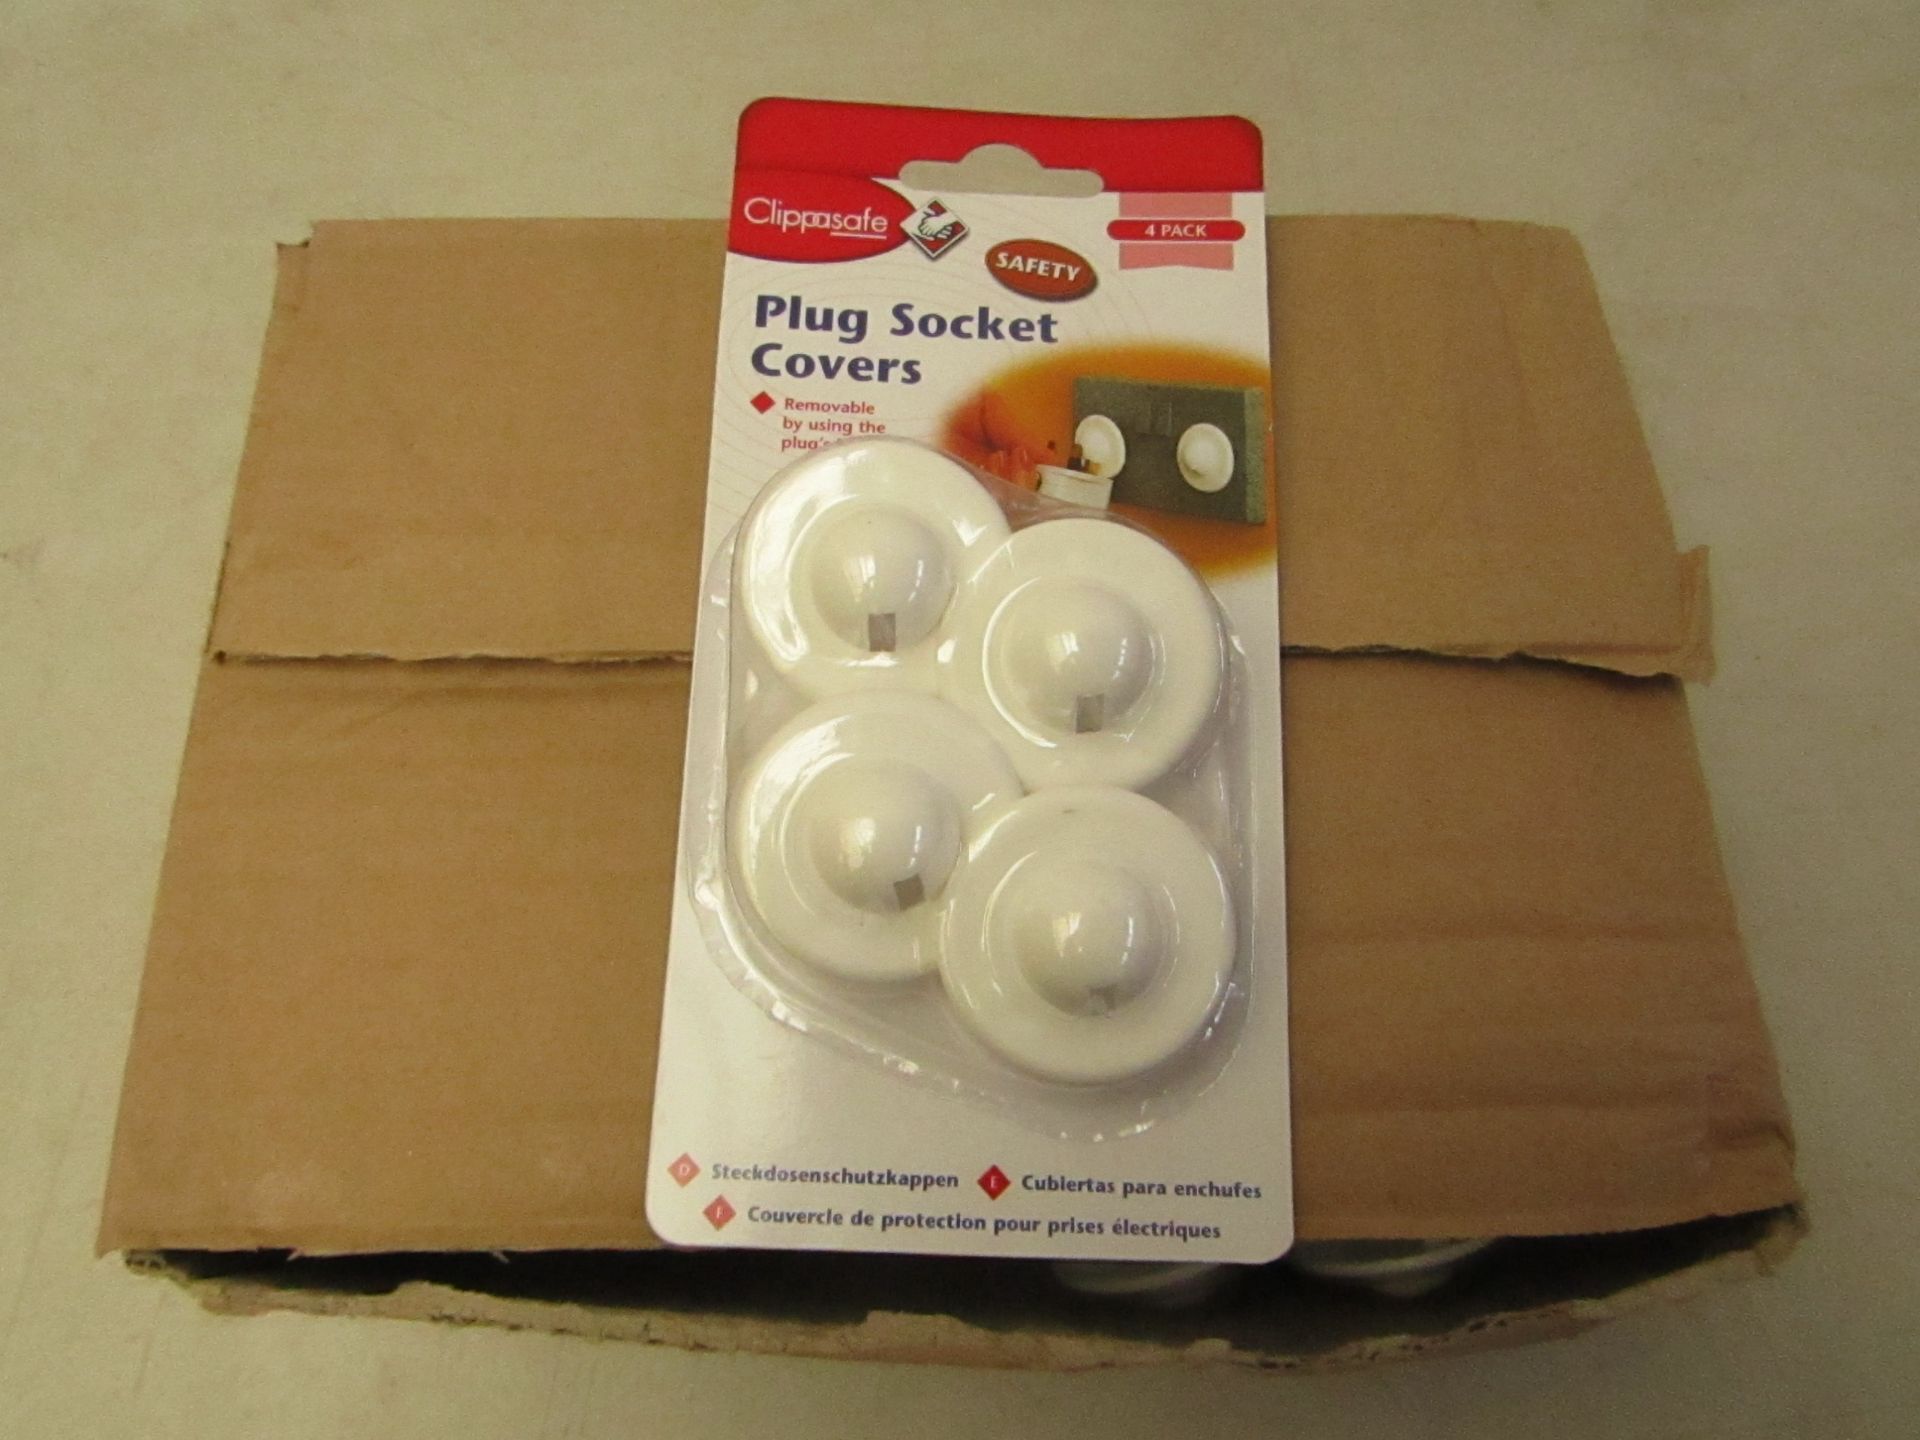 10x pack of Clippasafe plug socket covers, each pack contains 4 covers, packaged